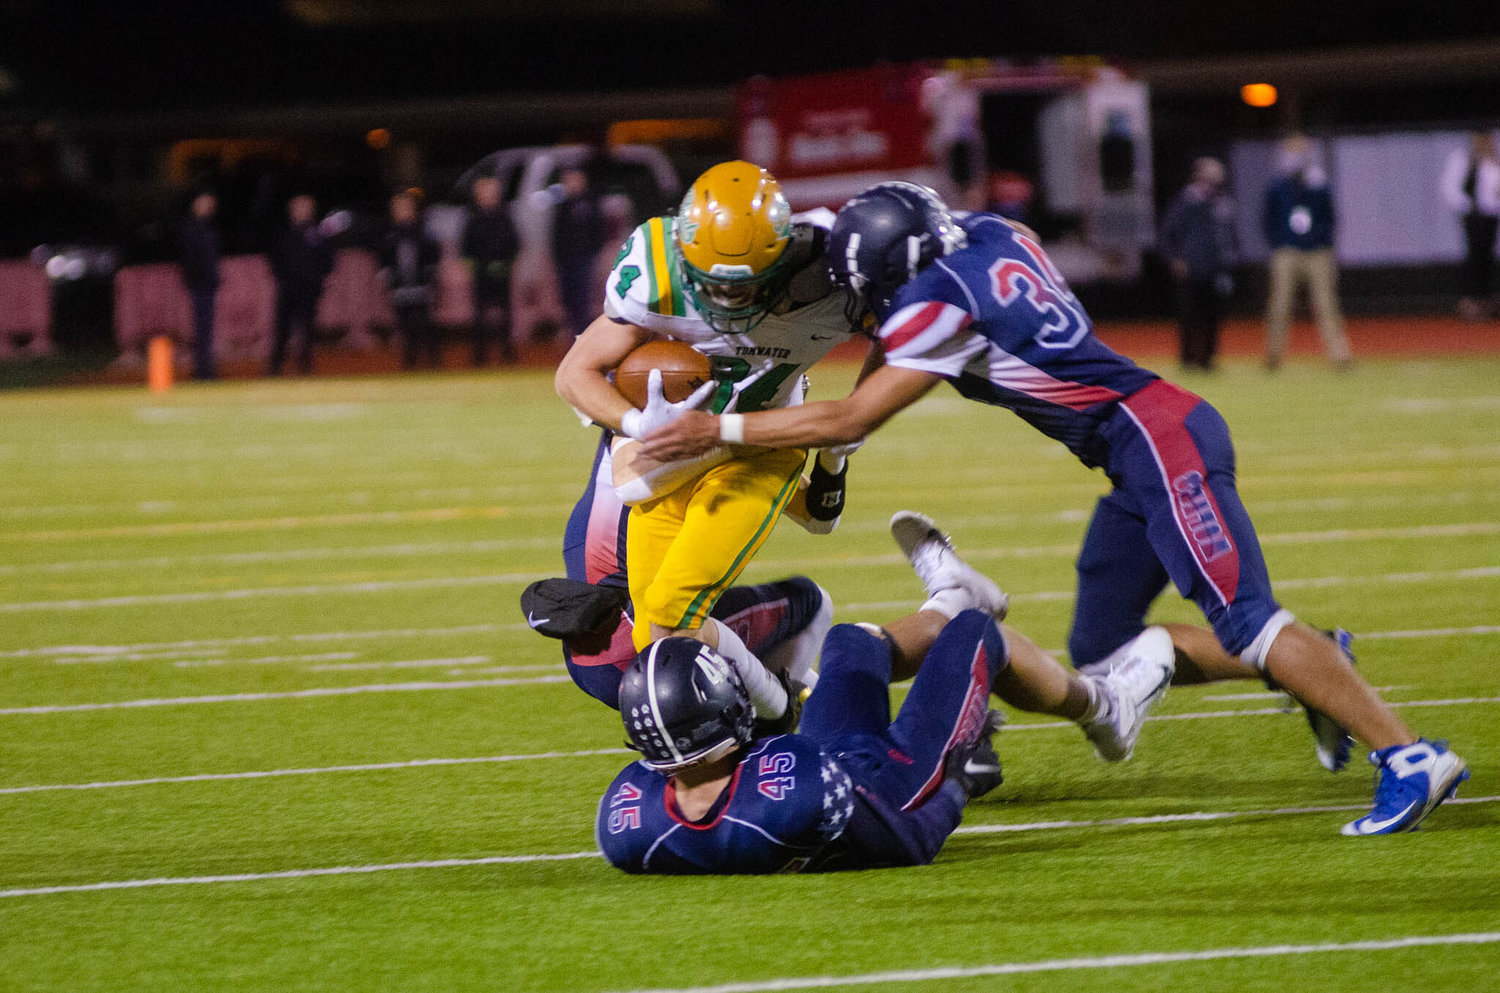 Tumwater’s Payton Hoyt rushes the ball Friday night at the 22nd Annual Pioneer Bowl.